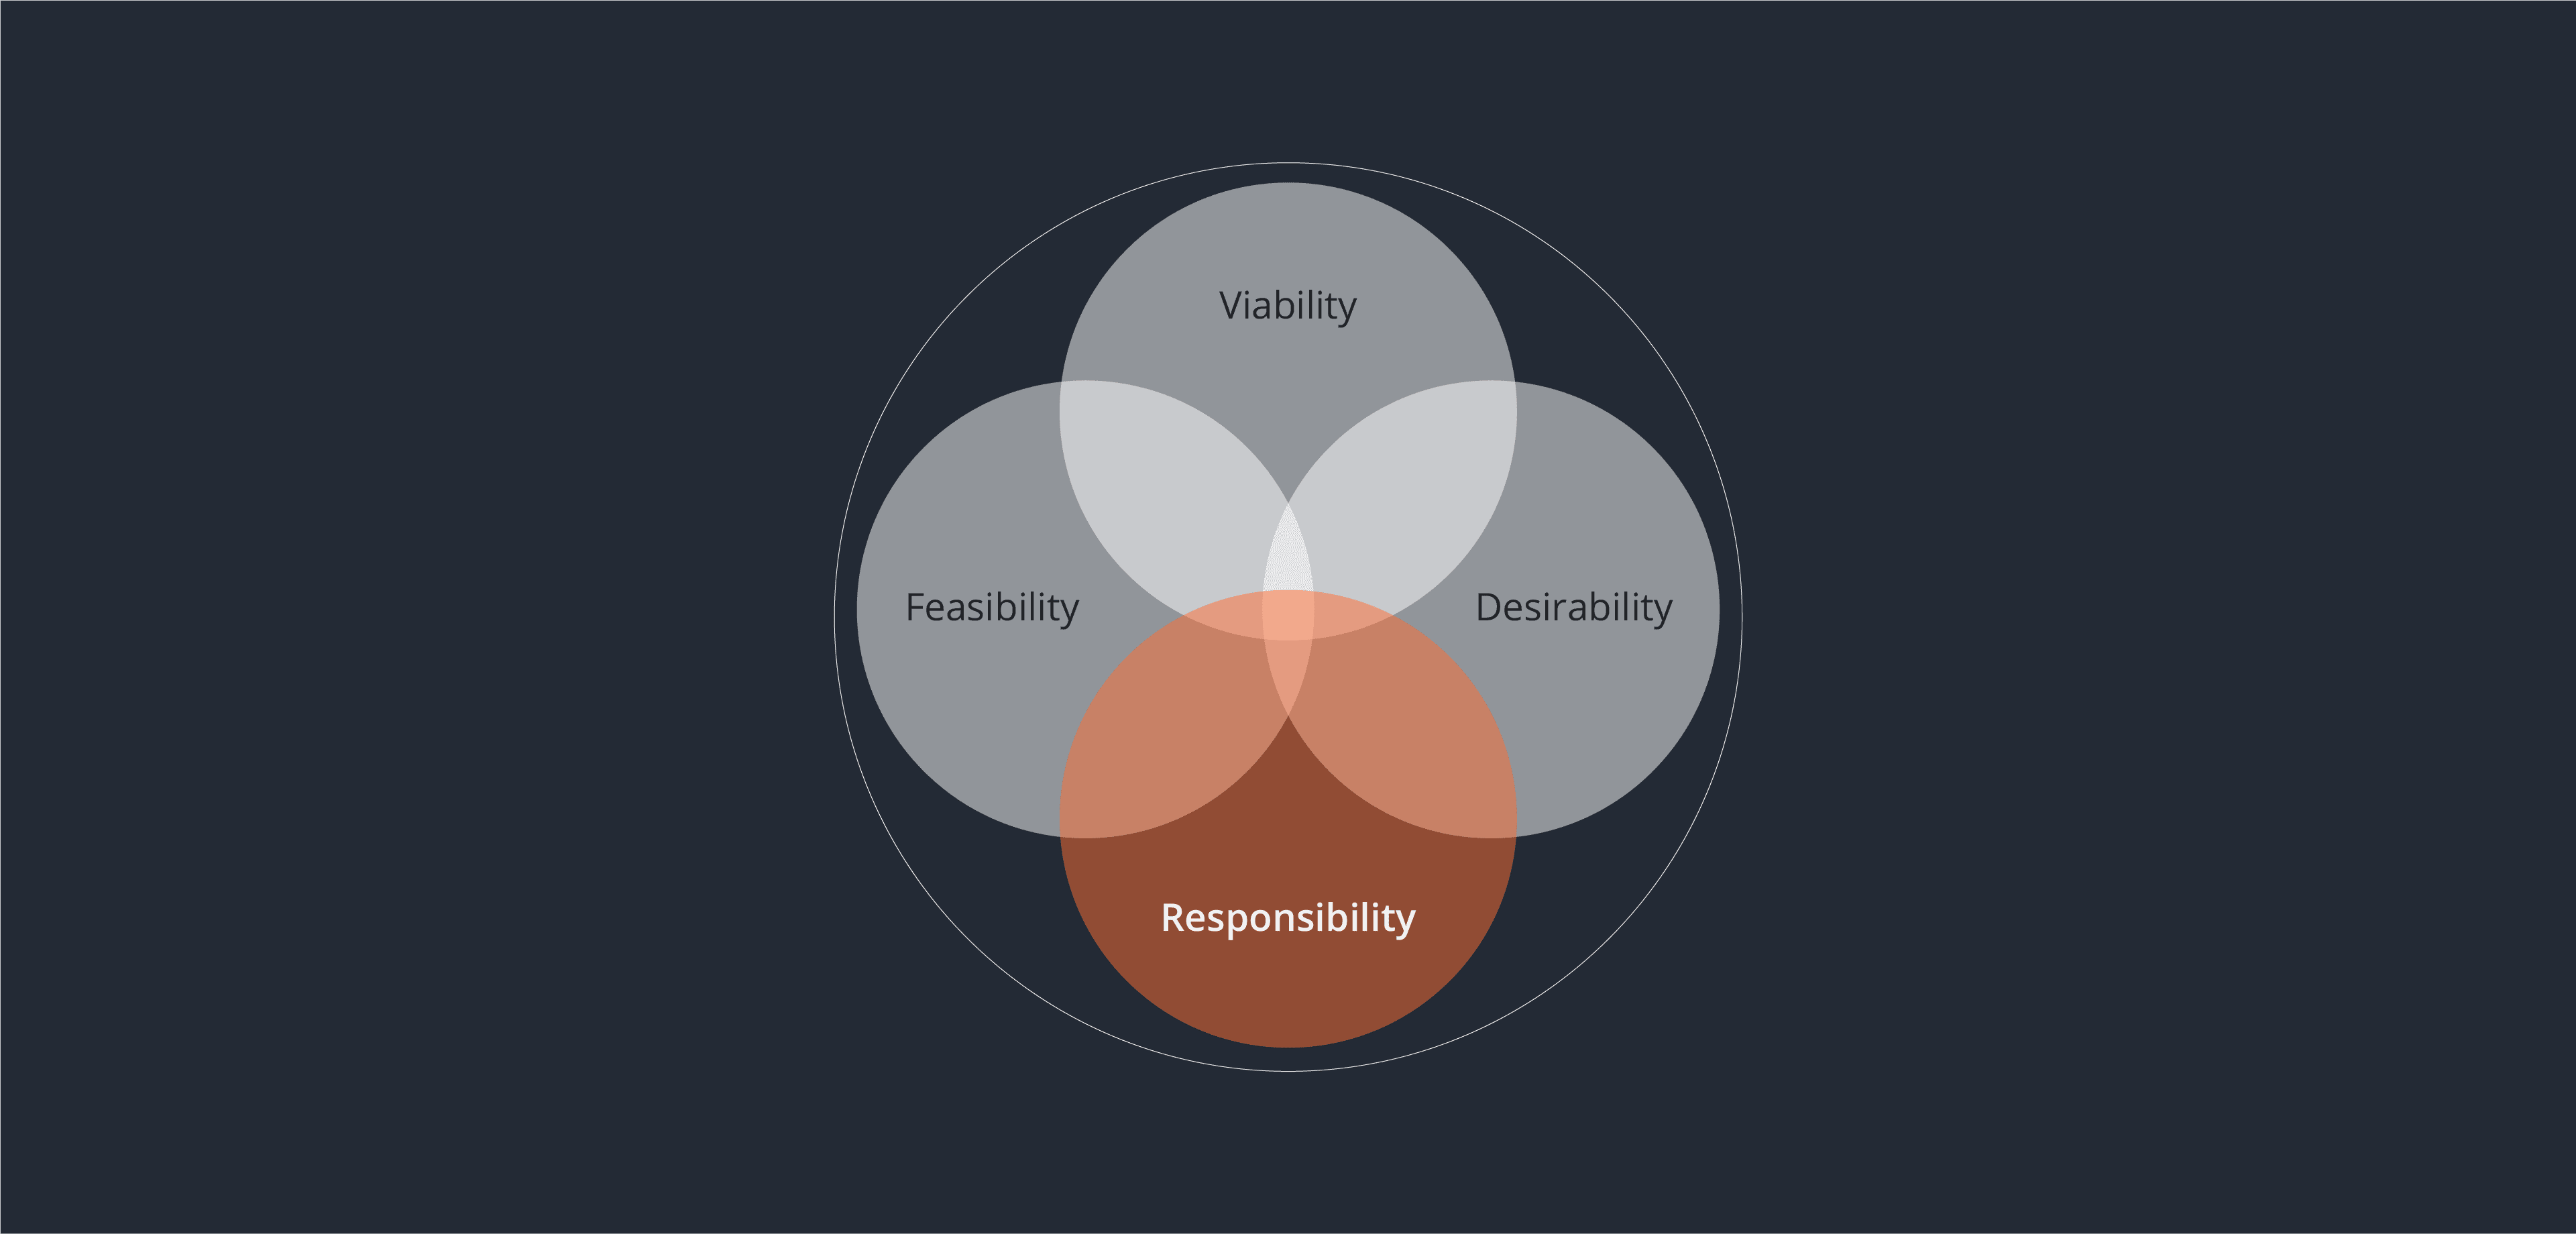 Rodd have added the fourth lobe to the classic design thinking Venn